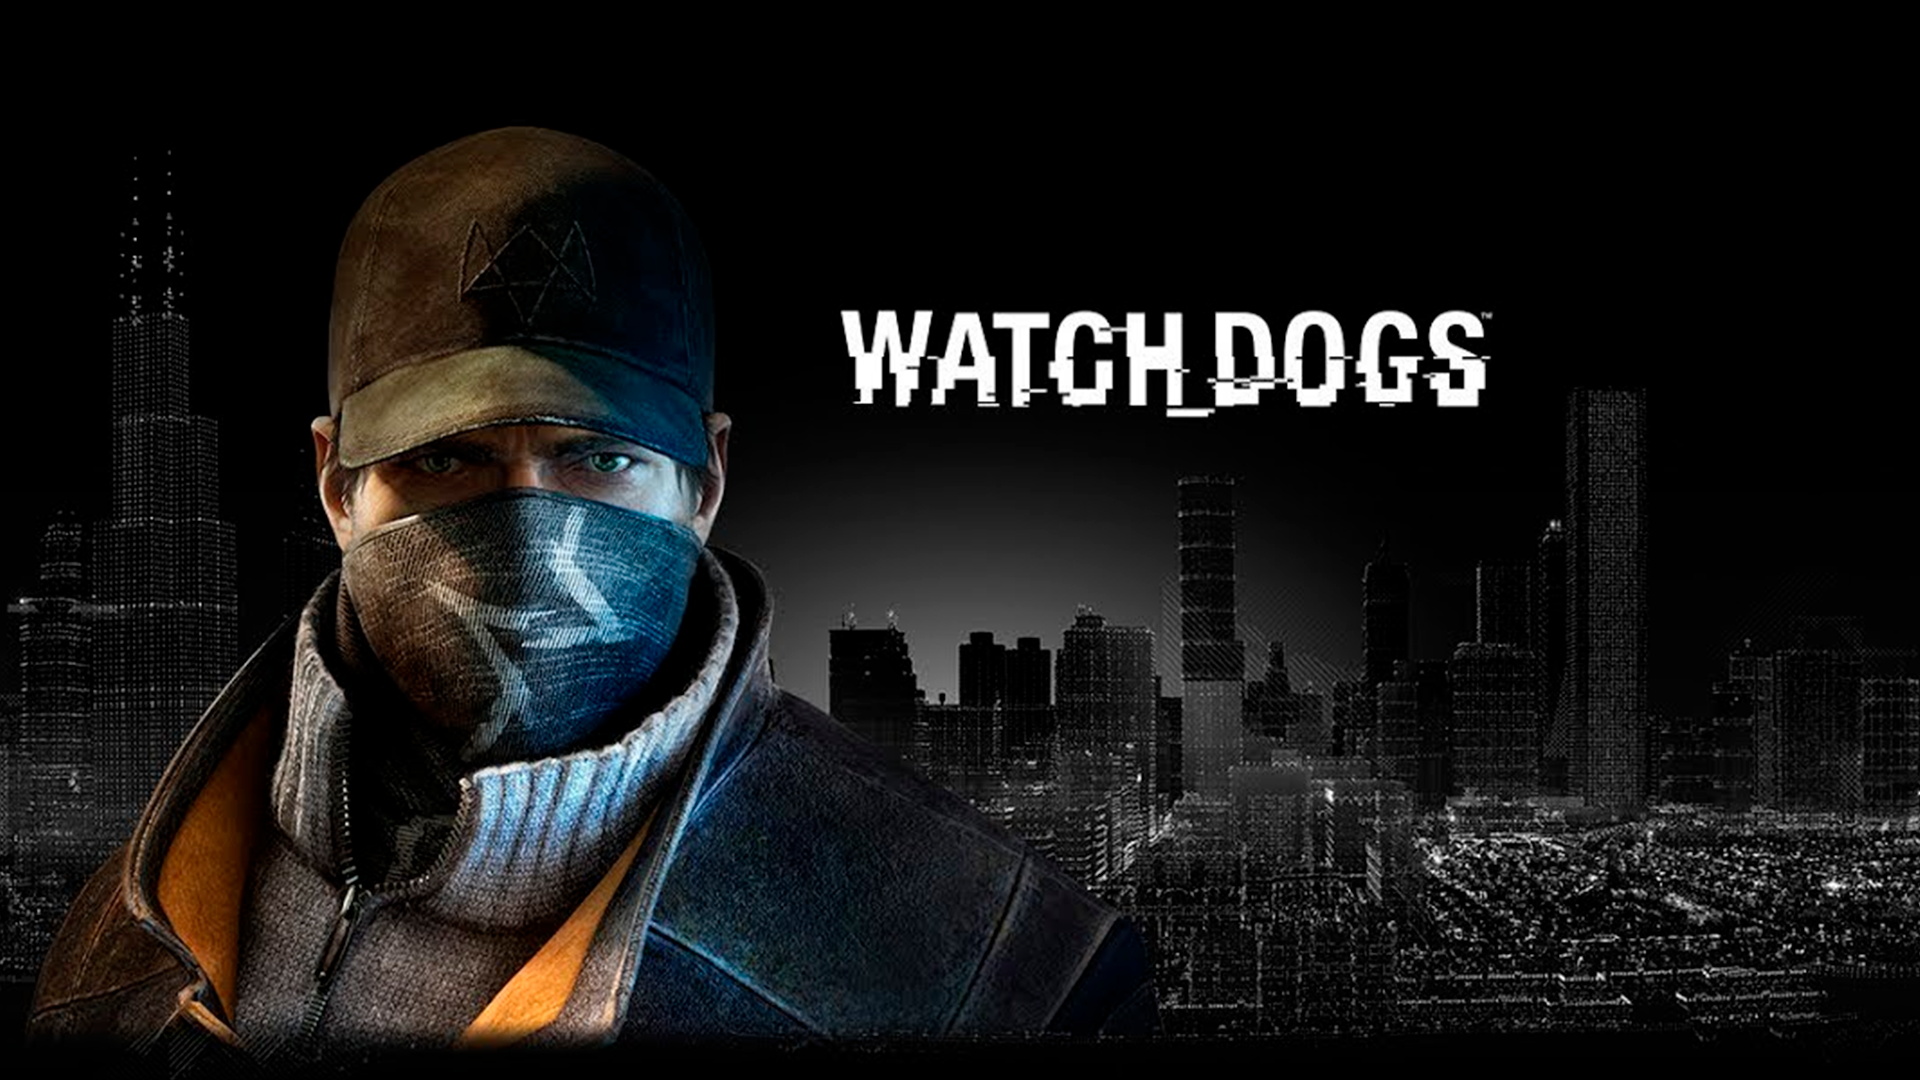 Watch Dogs Movie News - Longpost, Technologies, Adventures, Intrigue, Video game, Casting, Games, Screen adaptation, Thriller, Drama, Crime, Боевики, Frame, Poster, Chicago, USA, Ubisoft, Watch dogs, Film and TV series news, Movies, news